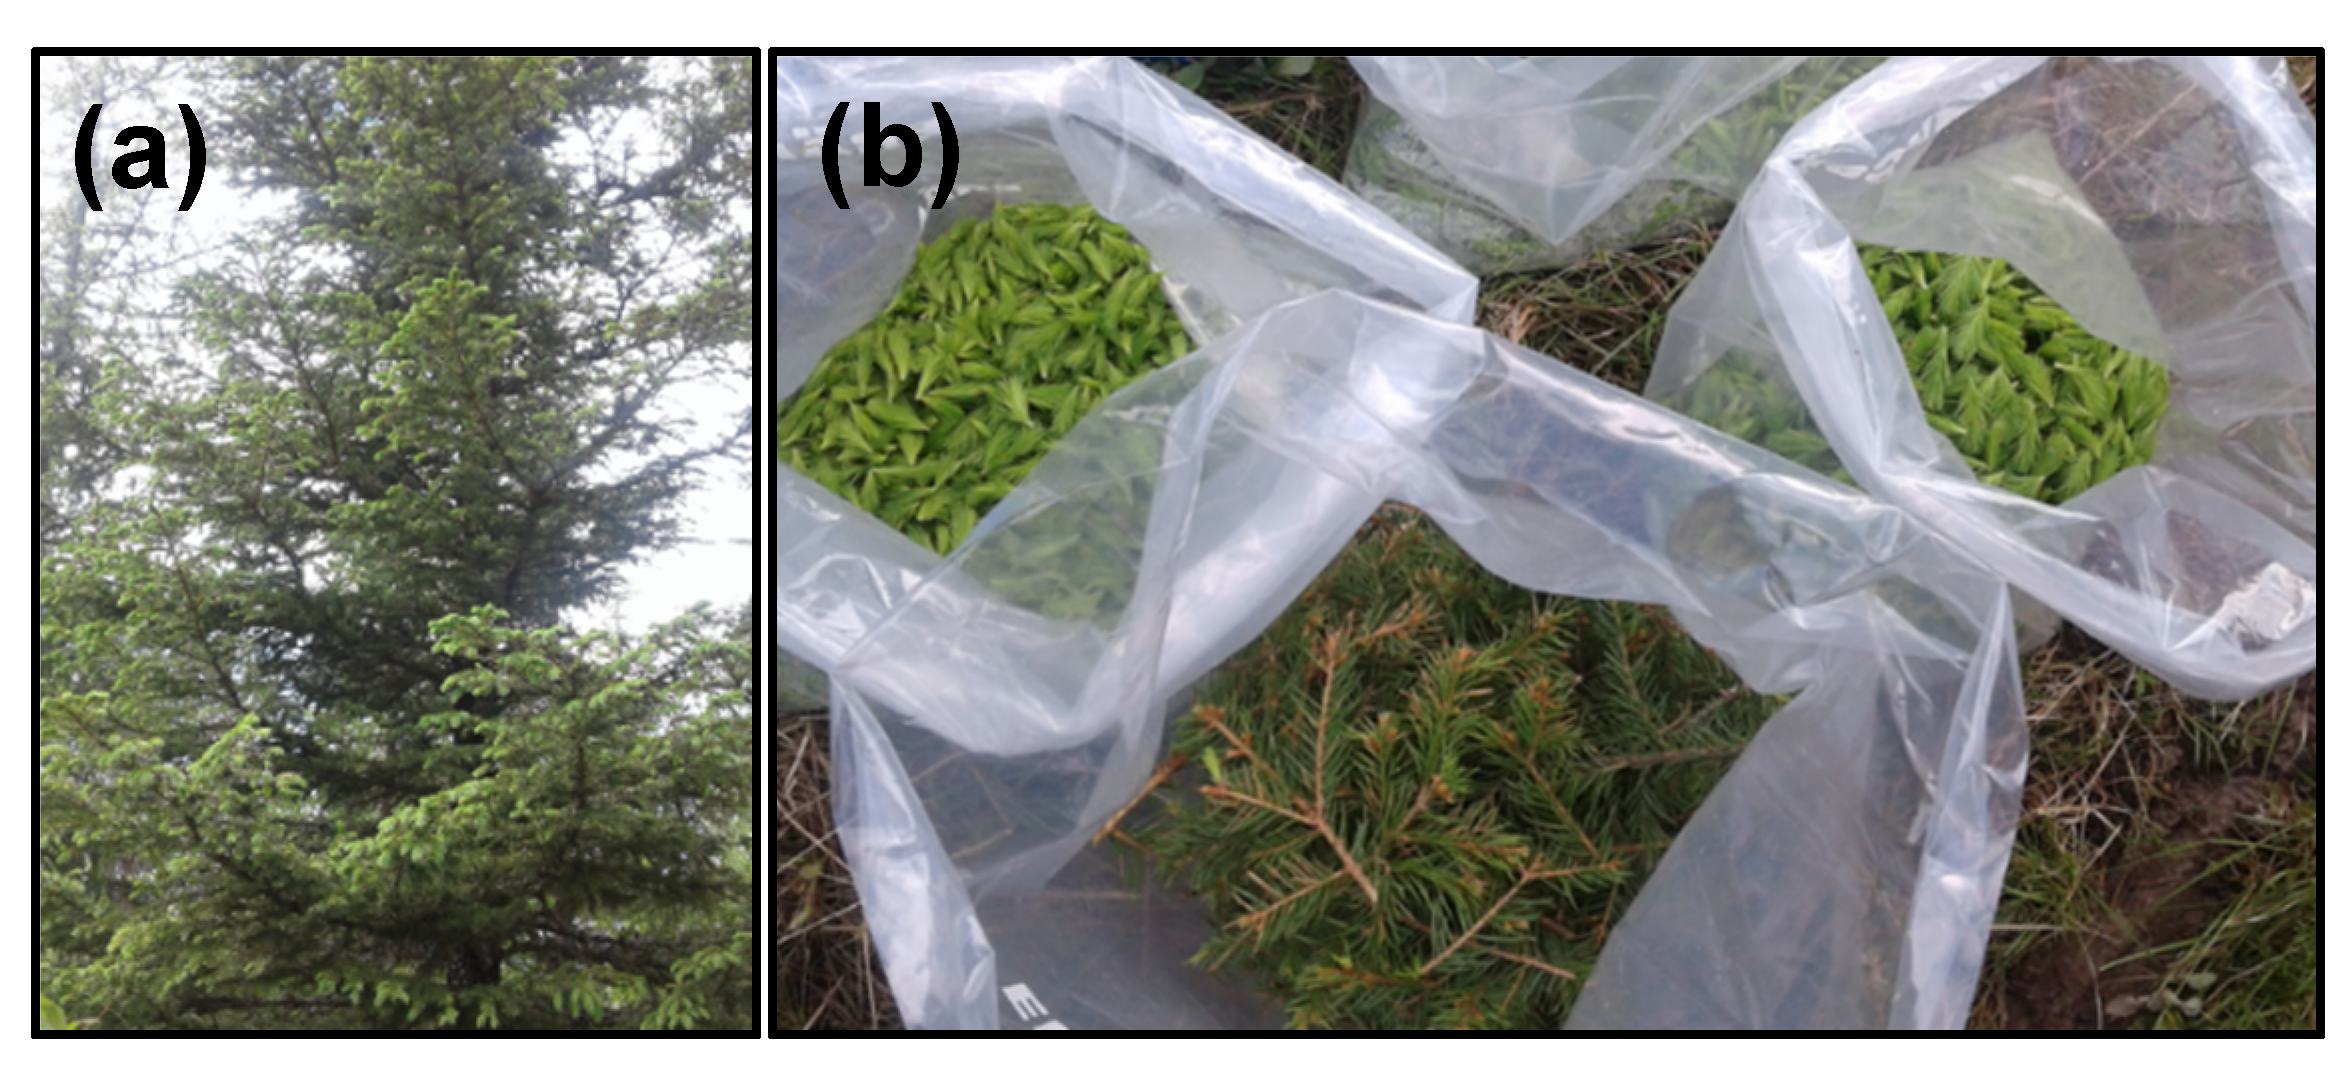 Molecules Free Full Text Sprouts And Needles Of Norway Spruce Picea Abies L Karst As Nordic Specialty Consumer Acceptance Stability Of Nutrients And Bioactivities During Storage Html